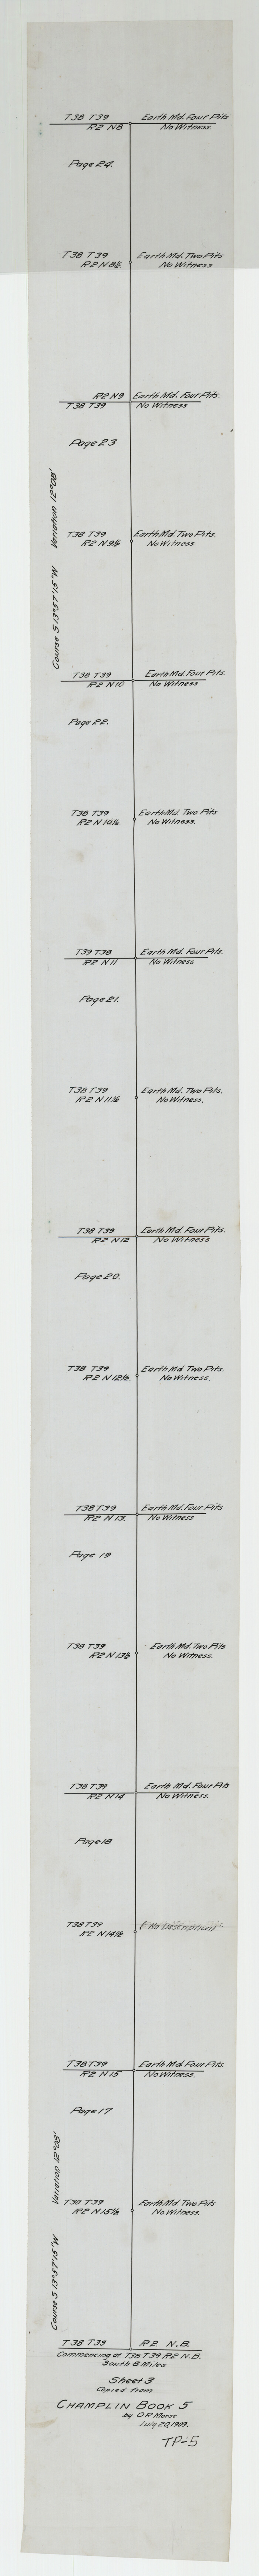 93179, Sheet 3 copied from Champlin Book 5 [Strip Map showing T. & P. connecting lines], Twichell Survey Records